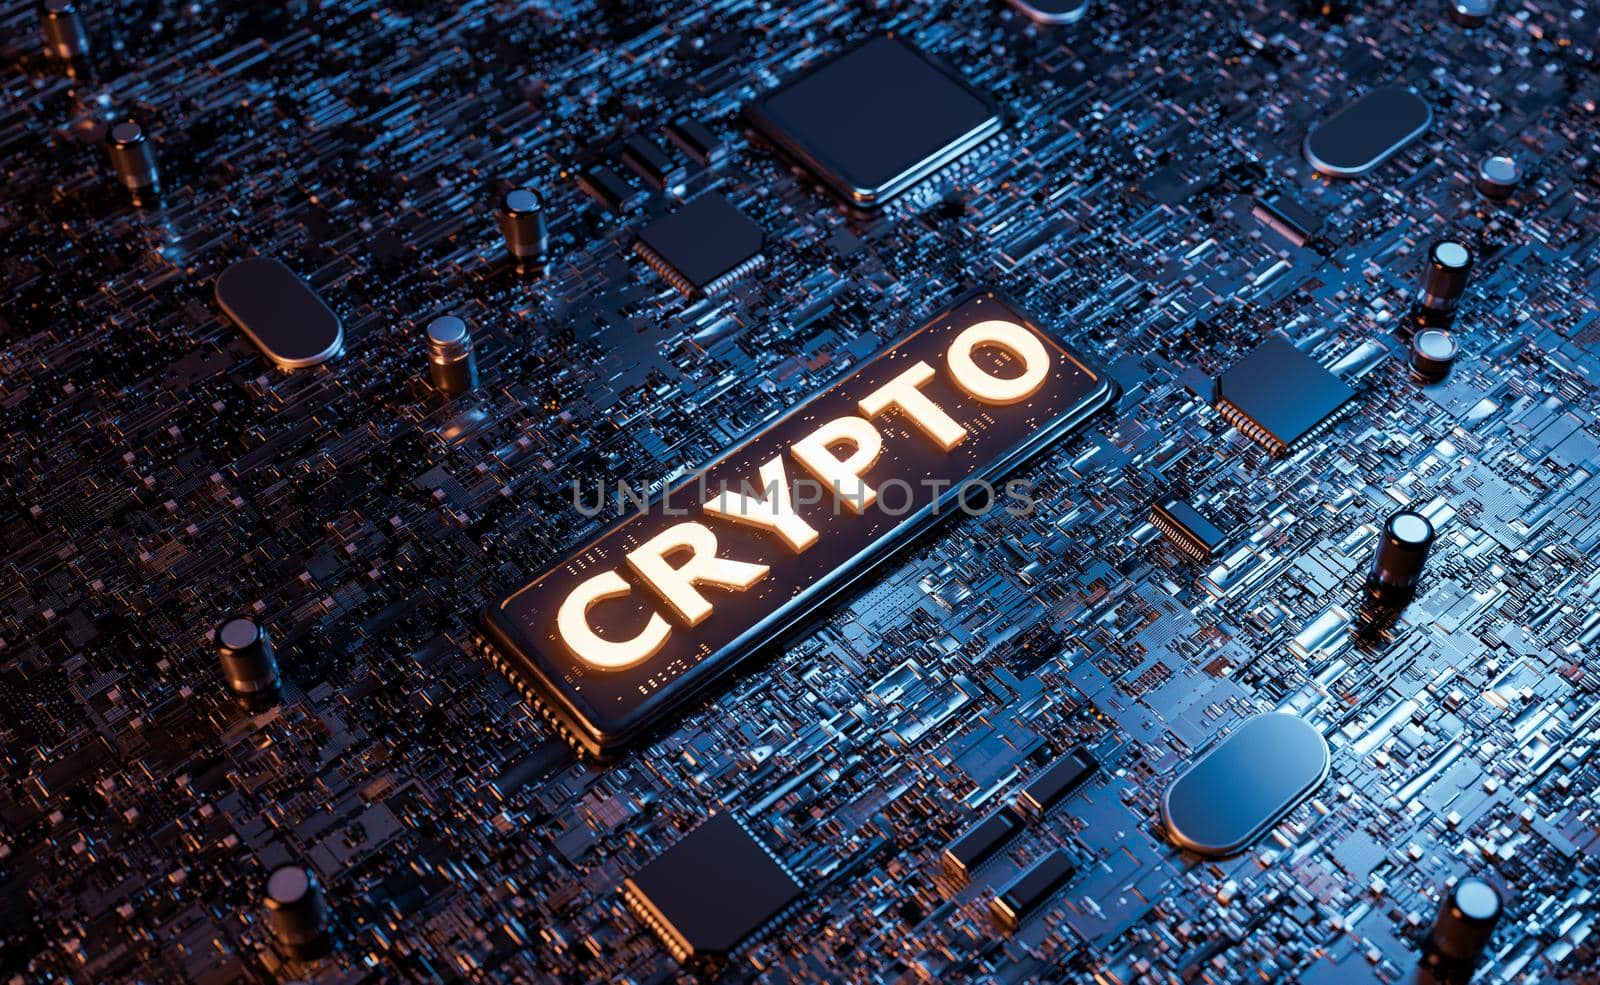 CRYPTO sign on an electronic board full of microchips by asolano